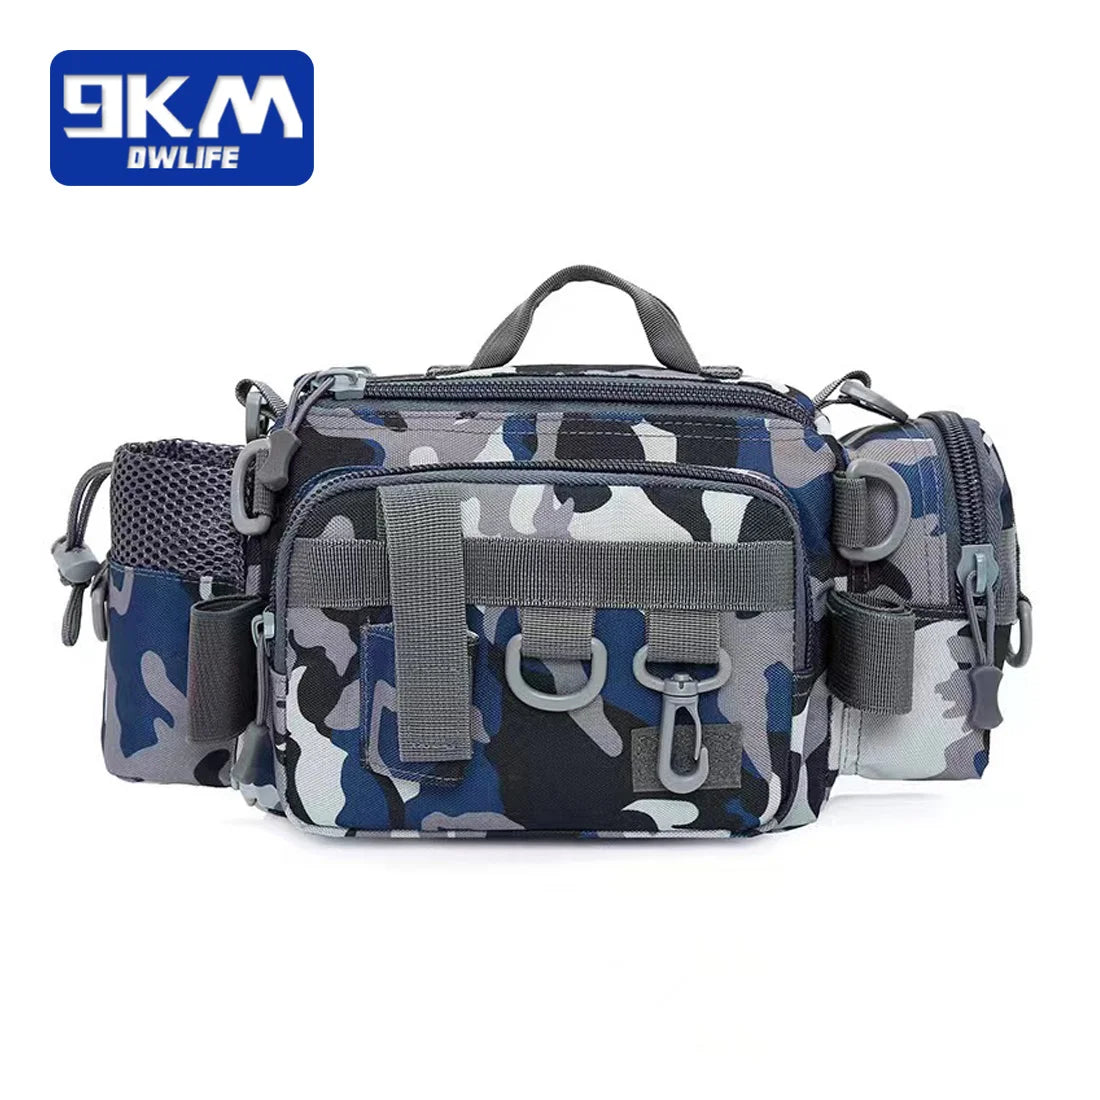 Fishing Backpack Resistant Fishing Storage Tackle Backpack Nylon Chest Pack Fishing Bag Outdoor Travel Hiking Camping Trekking